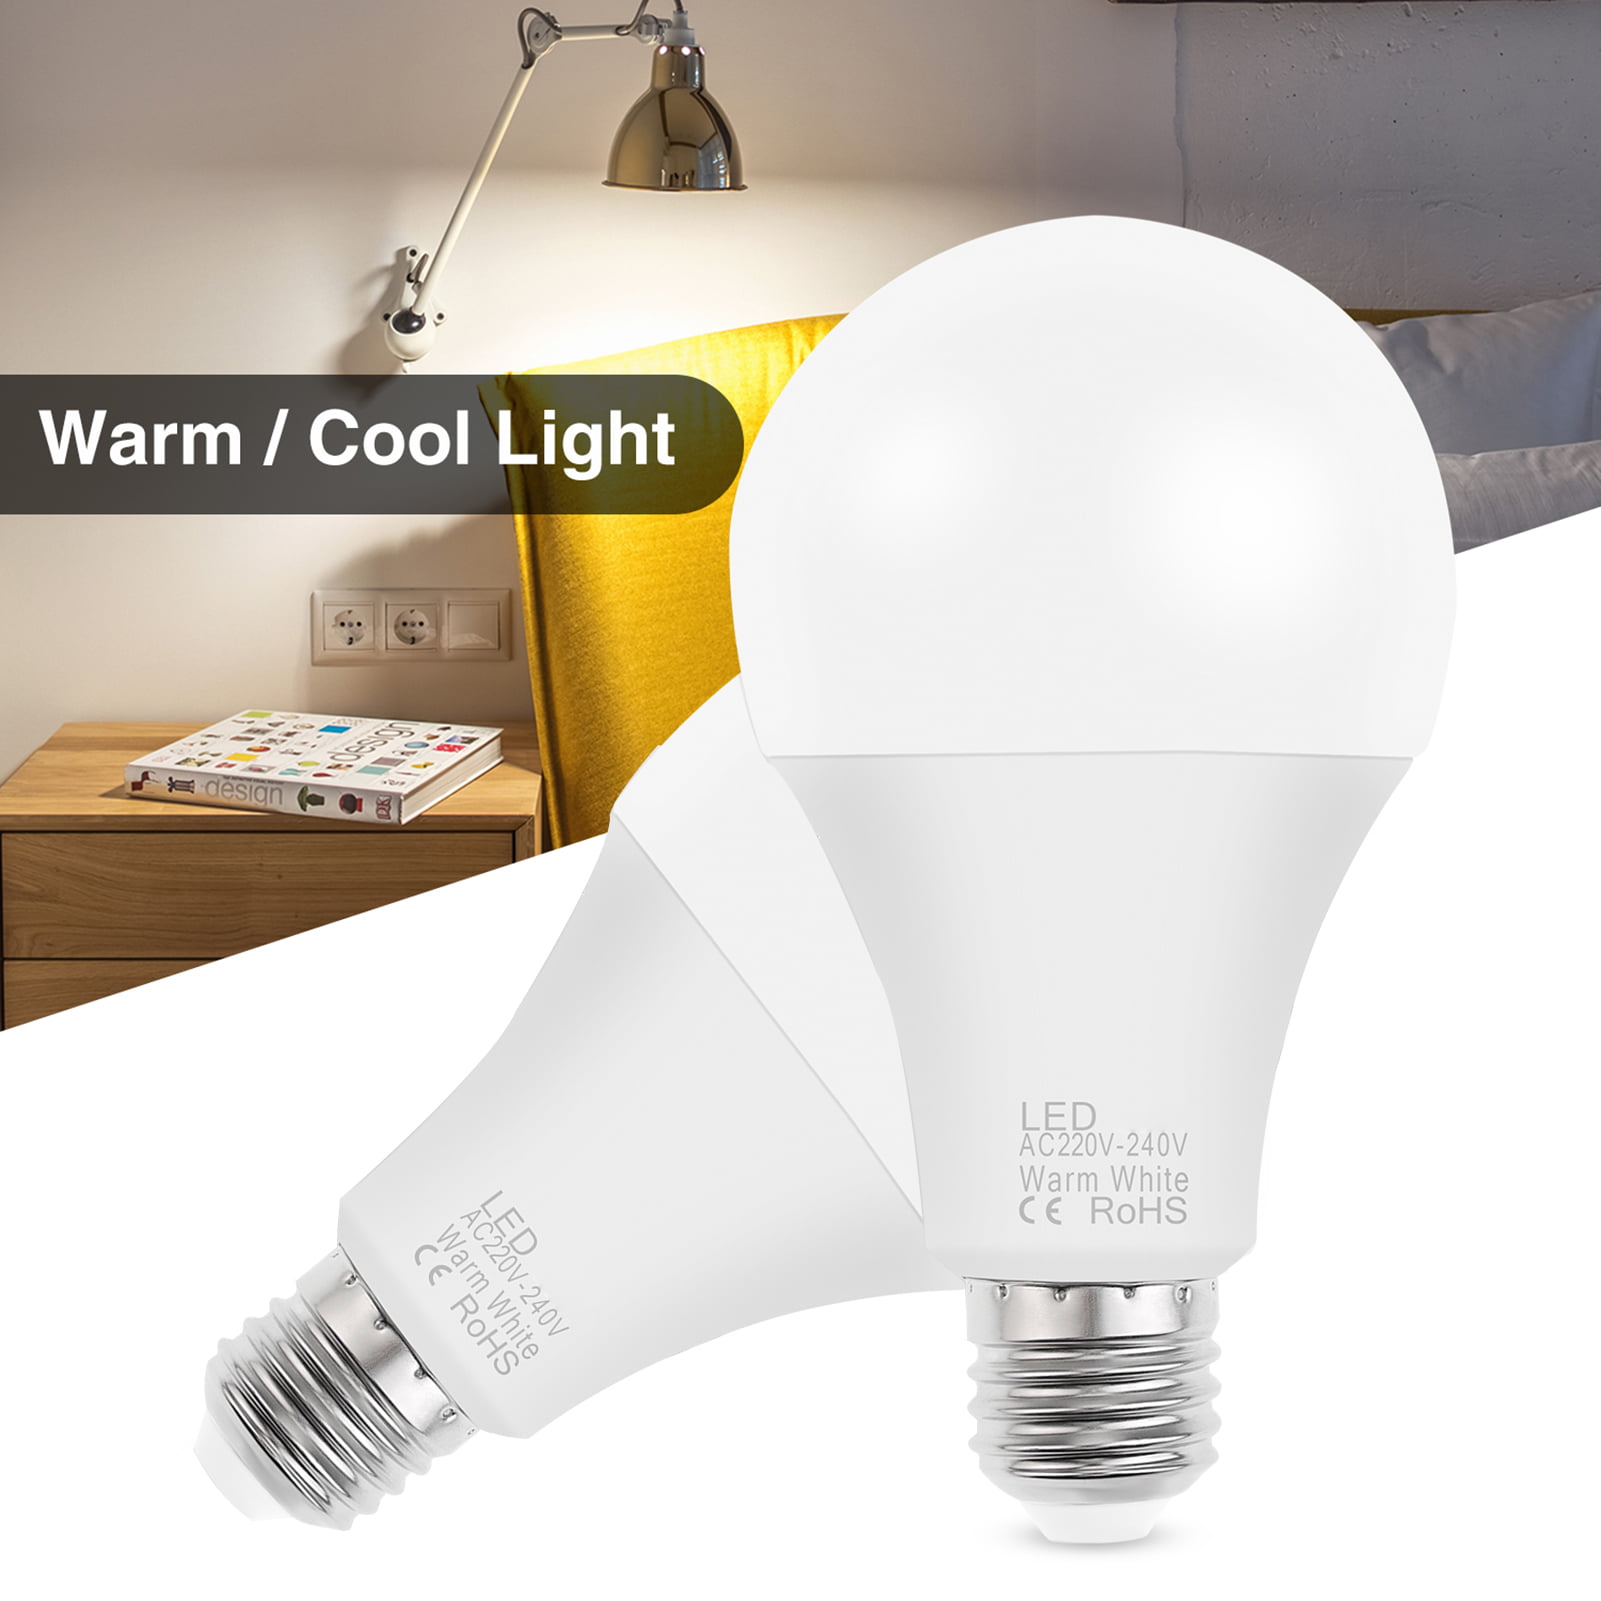 LED Bulb E27 5W & 9W Super Bright Energy Saving Spiral Light Bulb Pure Warm White Lighting is Not Dimmable Color : Warm White, Size : 9W 